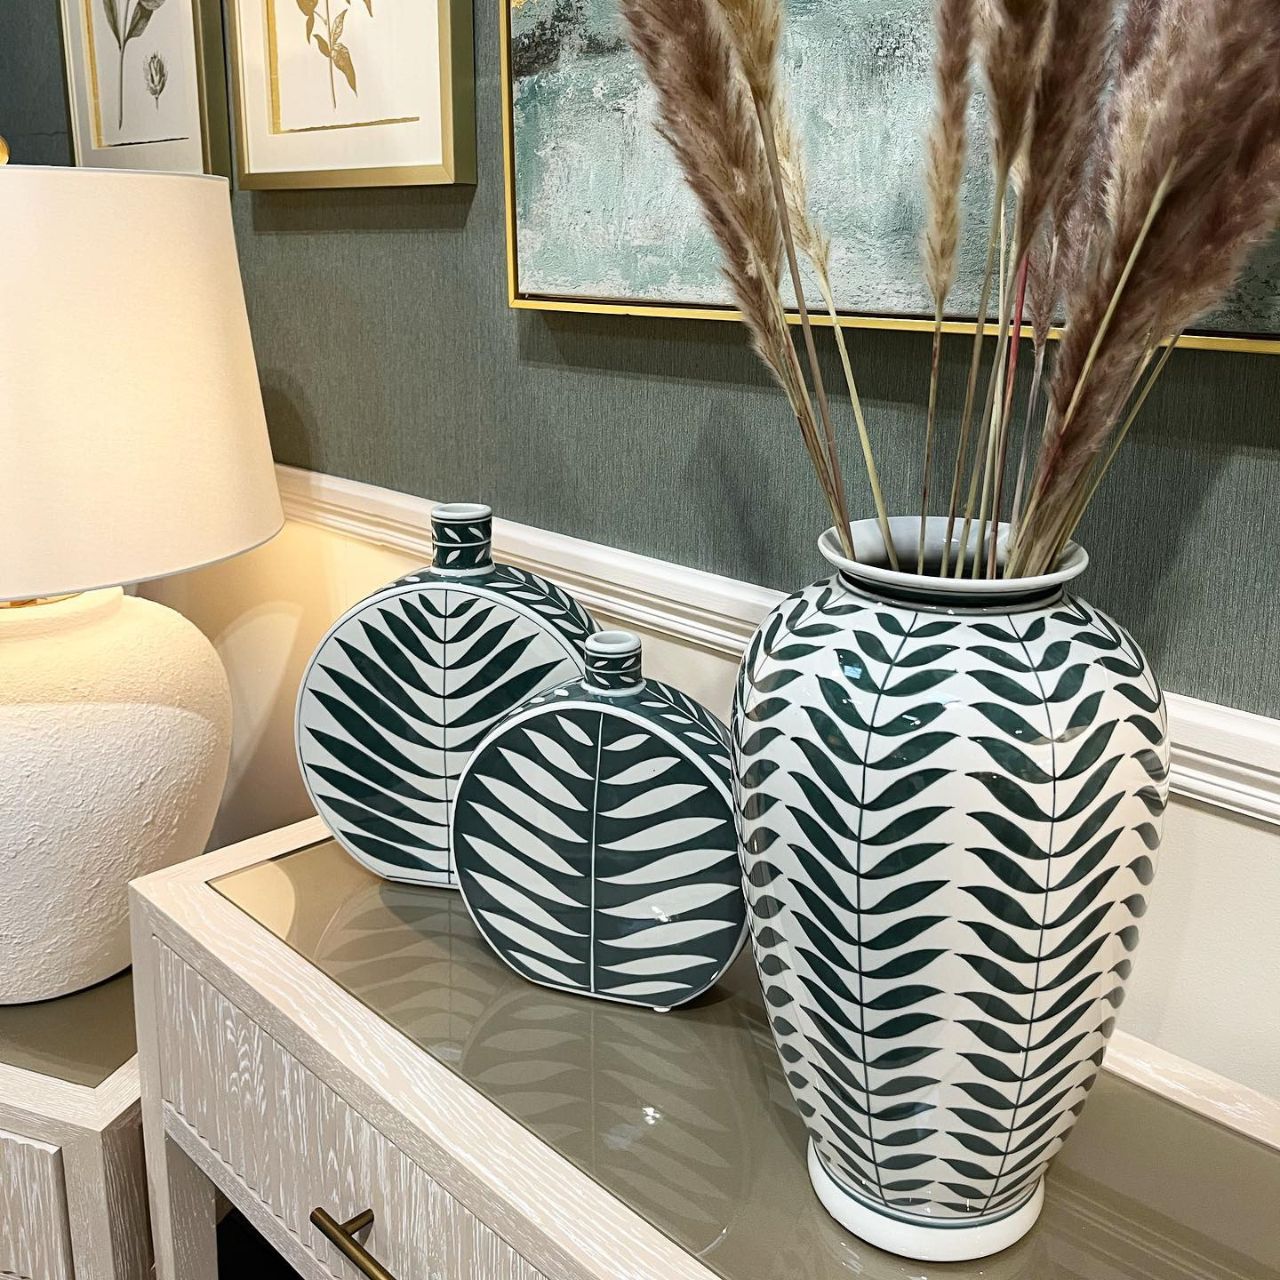 Leaf Vase by Mindy Brownes  This gorgeous ceramic decorative vase will add a delicate pop of colour to your home. The calming colour pallet with it's off white base and green leaf pattern will make this the perfect spring home accessory.